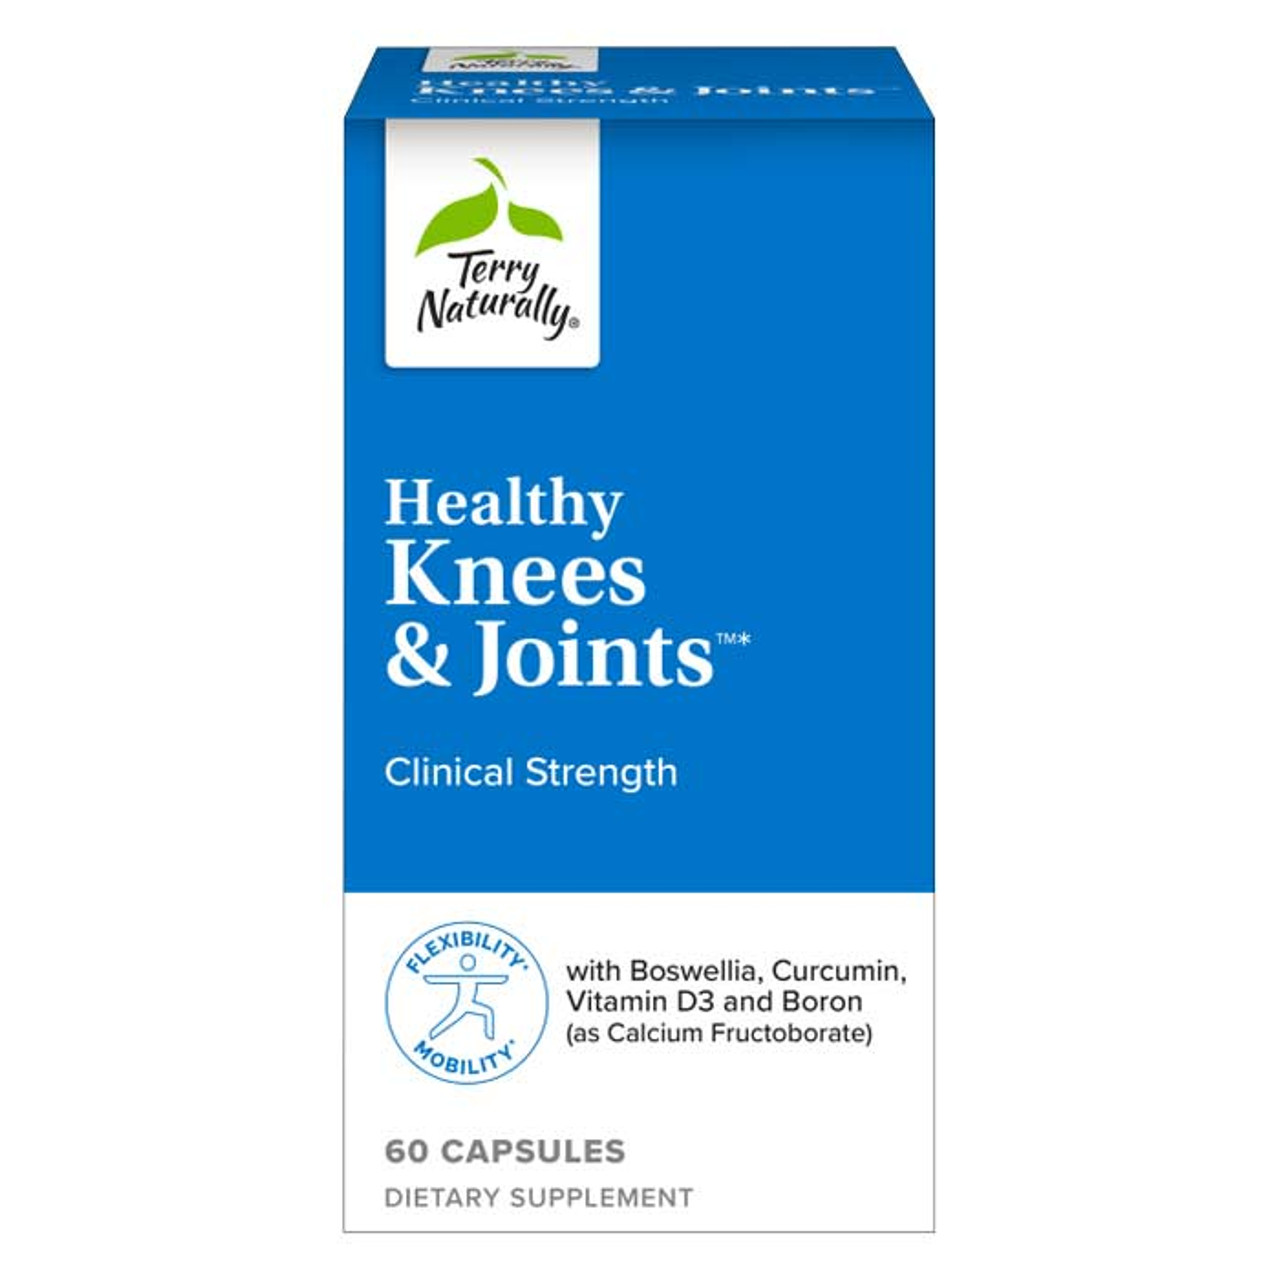 Terry Naturally Healthy Knees and Joints picture of product bottle